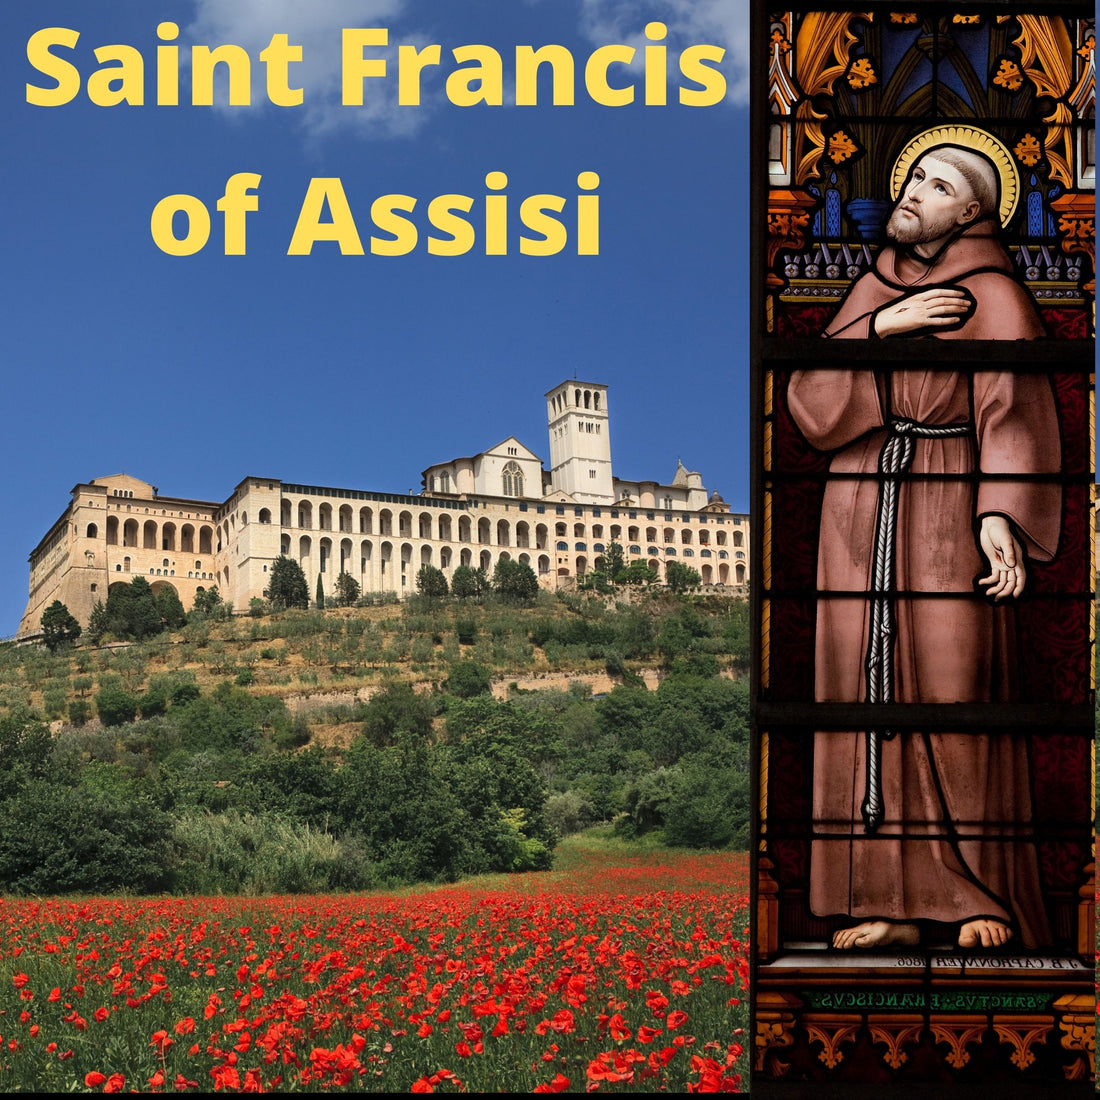 The Life of Saint Francis of Assisi